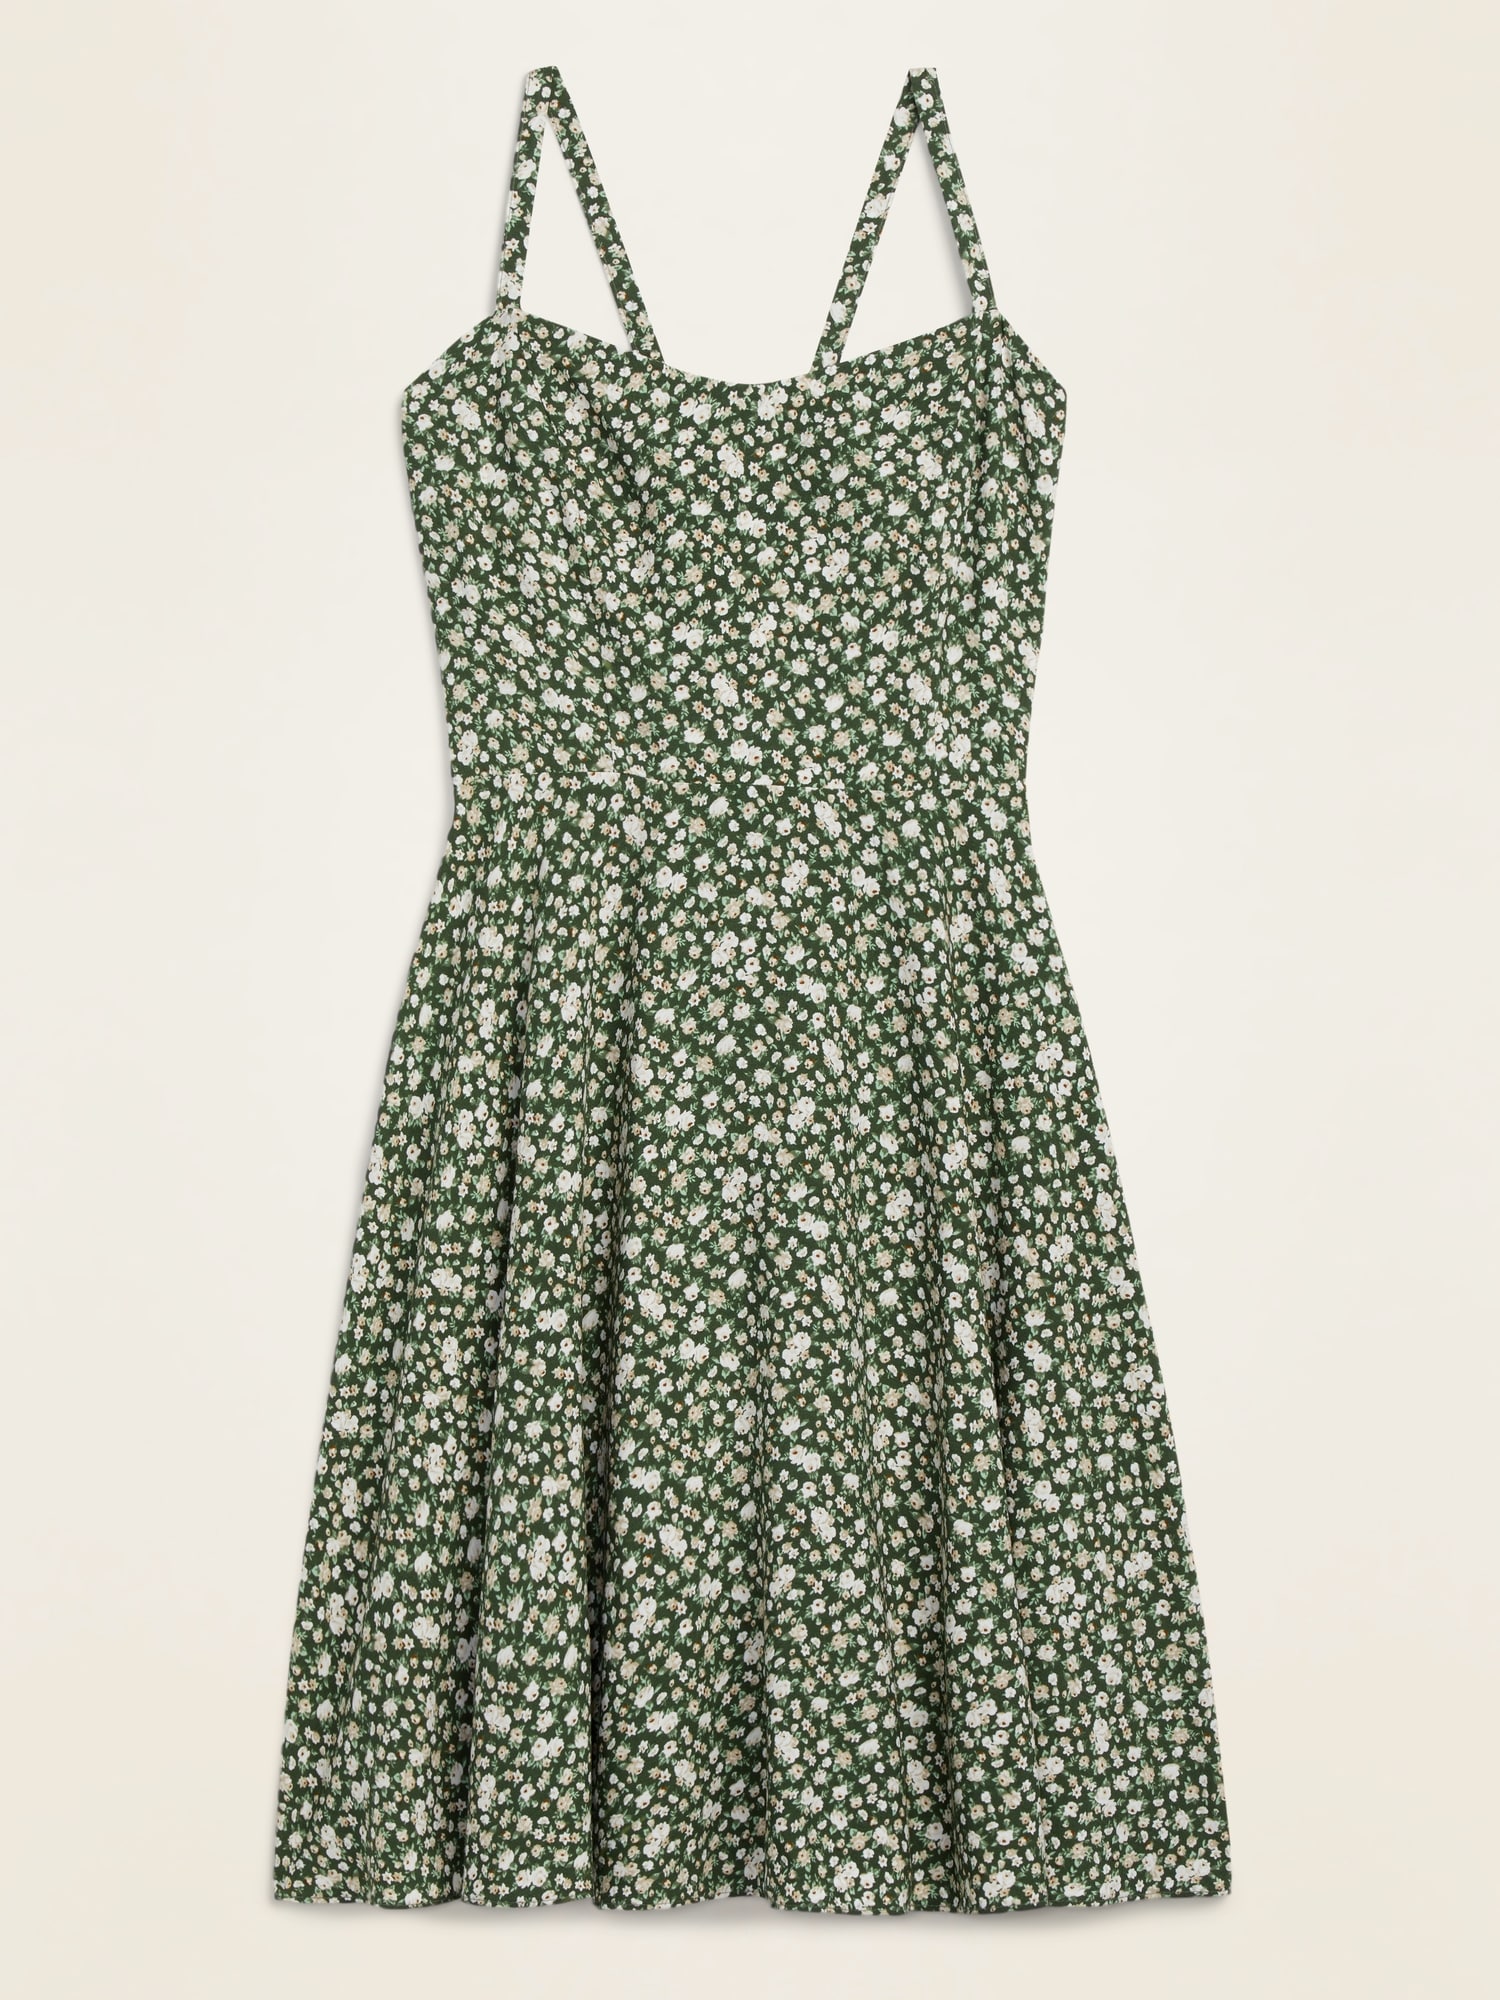 white floral dress old navy